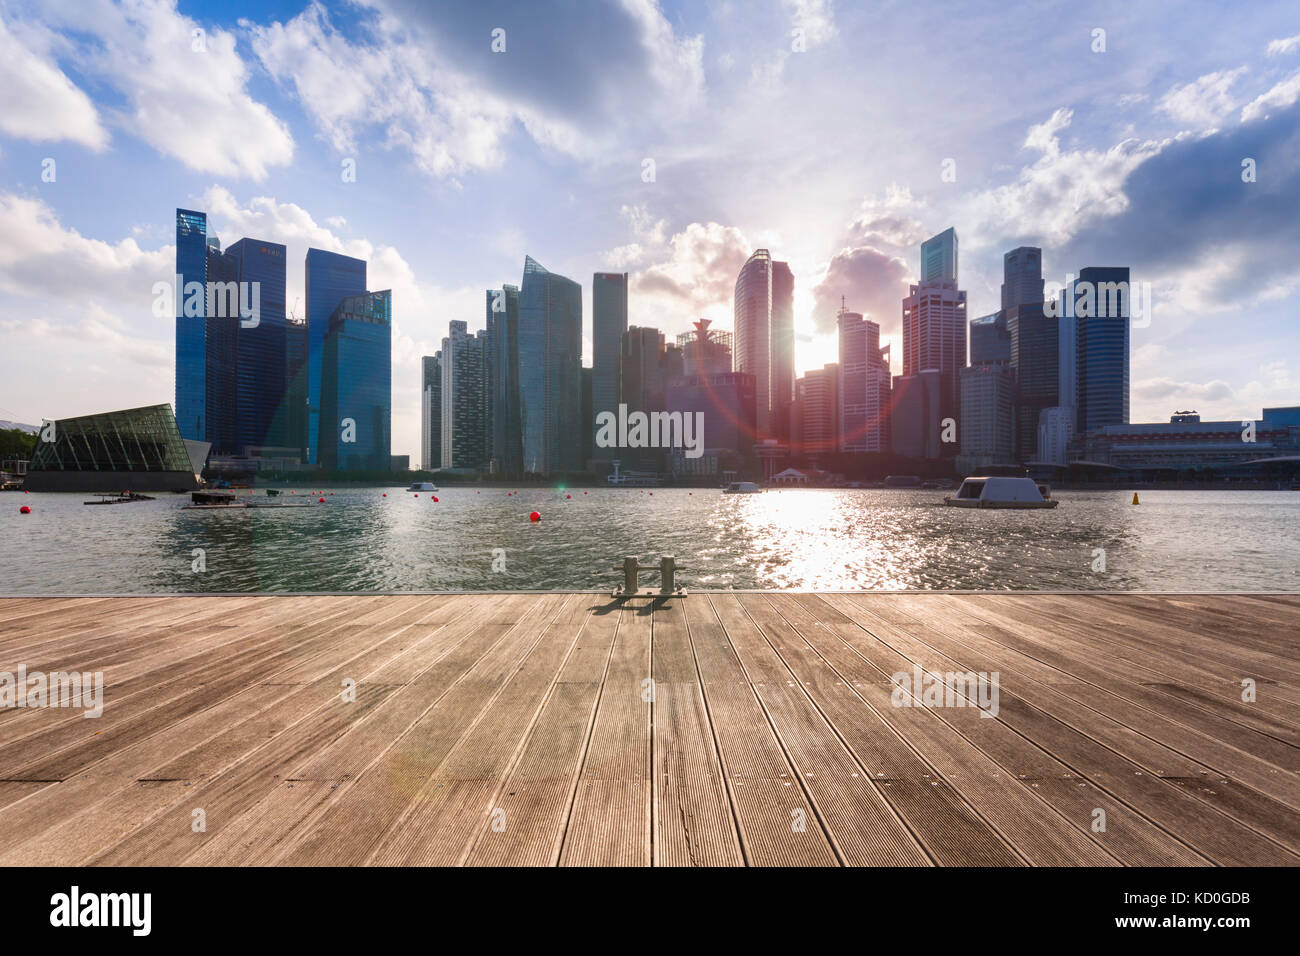 Waterfront view of city skyline, Singapore, South East Asia Stock Photo